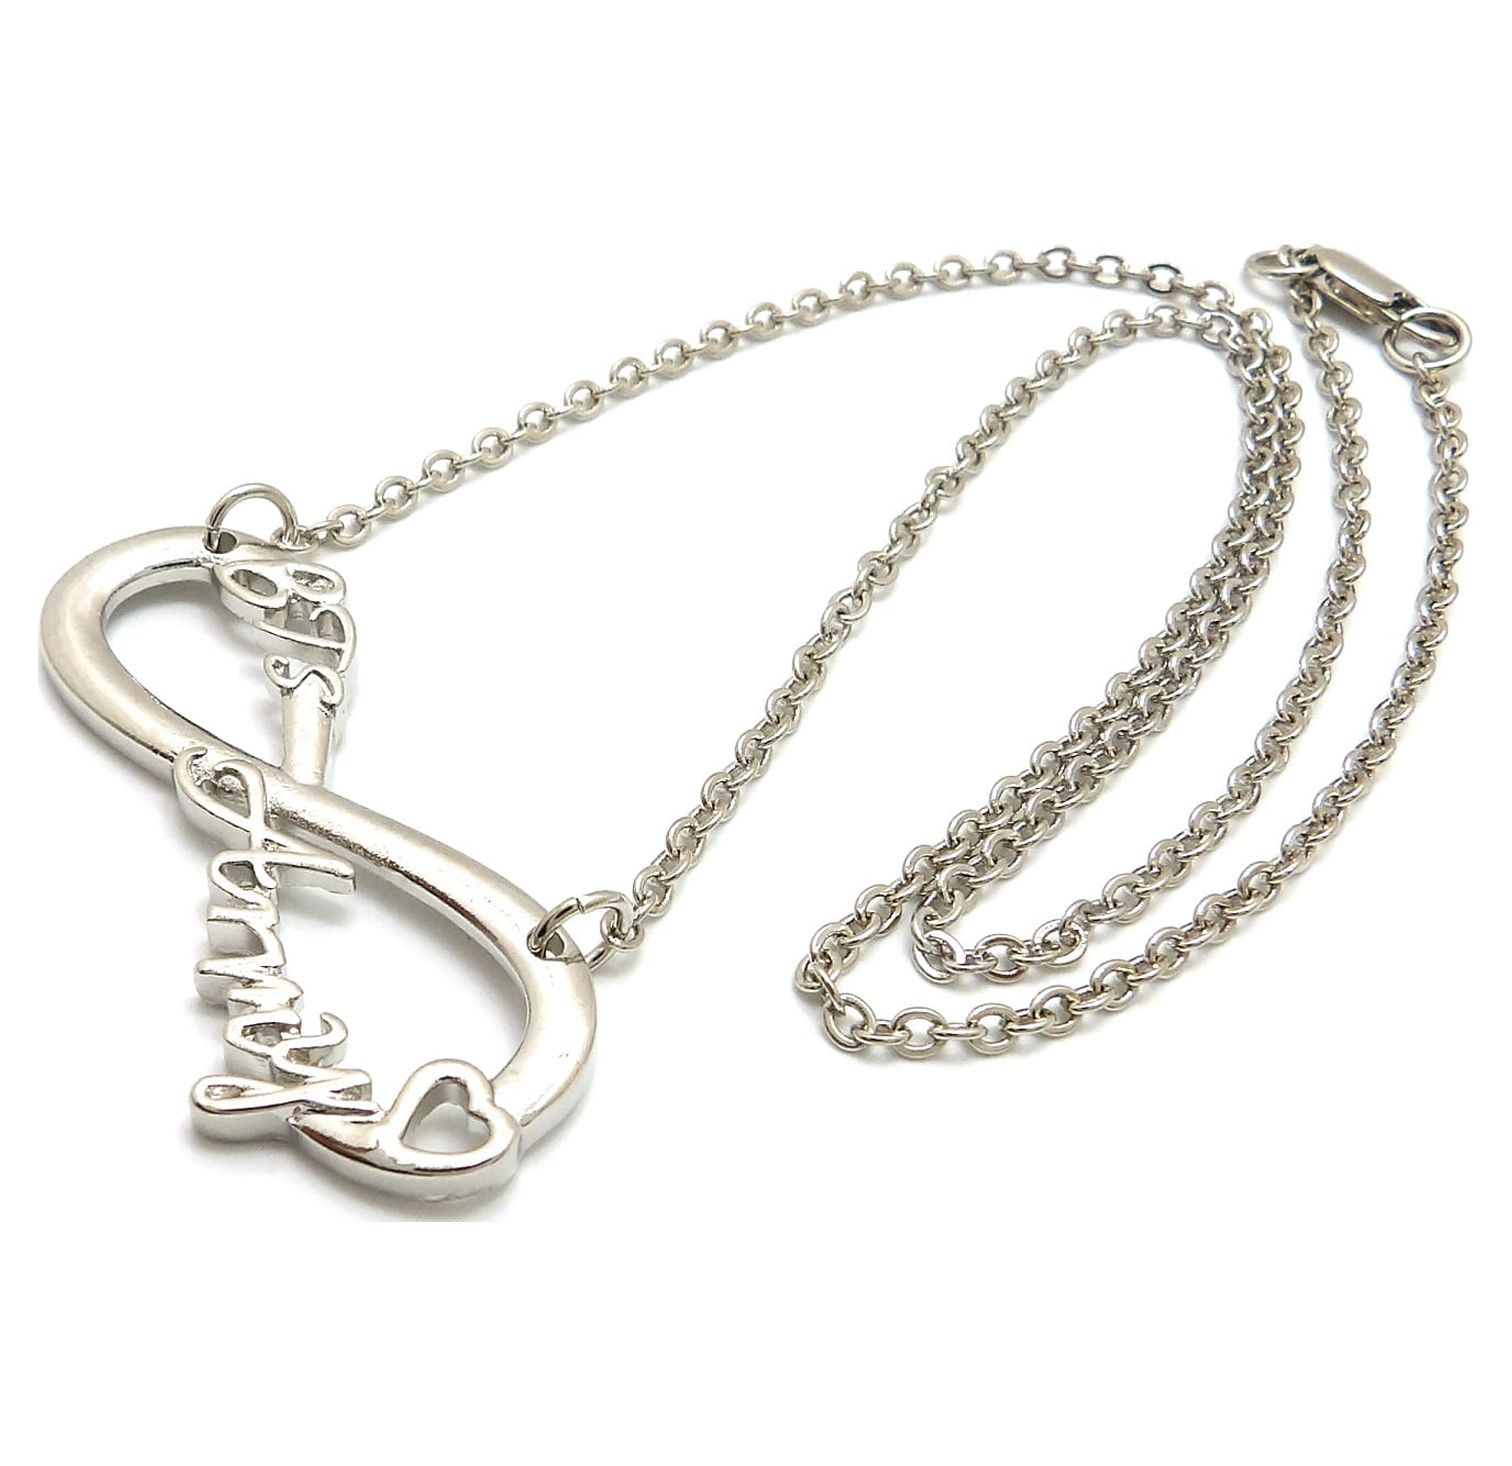 BTS Army Fans Infinity Sign Pendant with 2mm 18" Link Chain Necklace in Silver-Tone, BTS Army - image 3 of 4